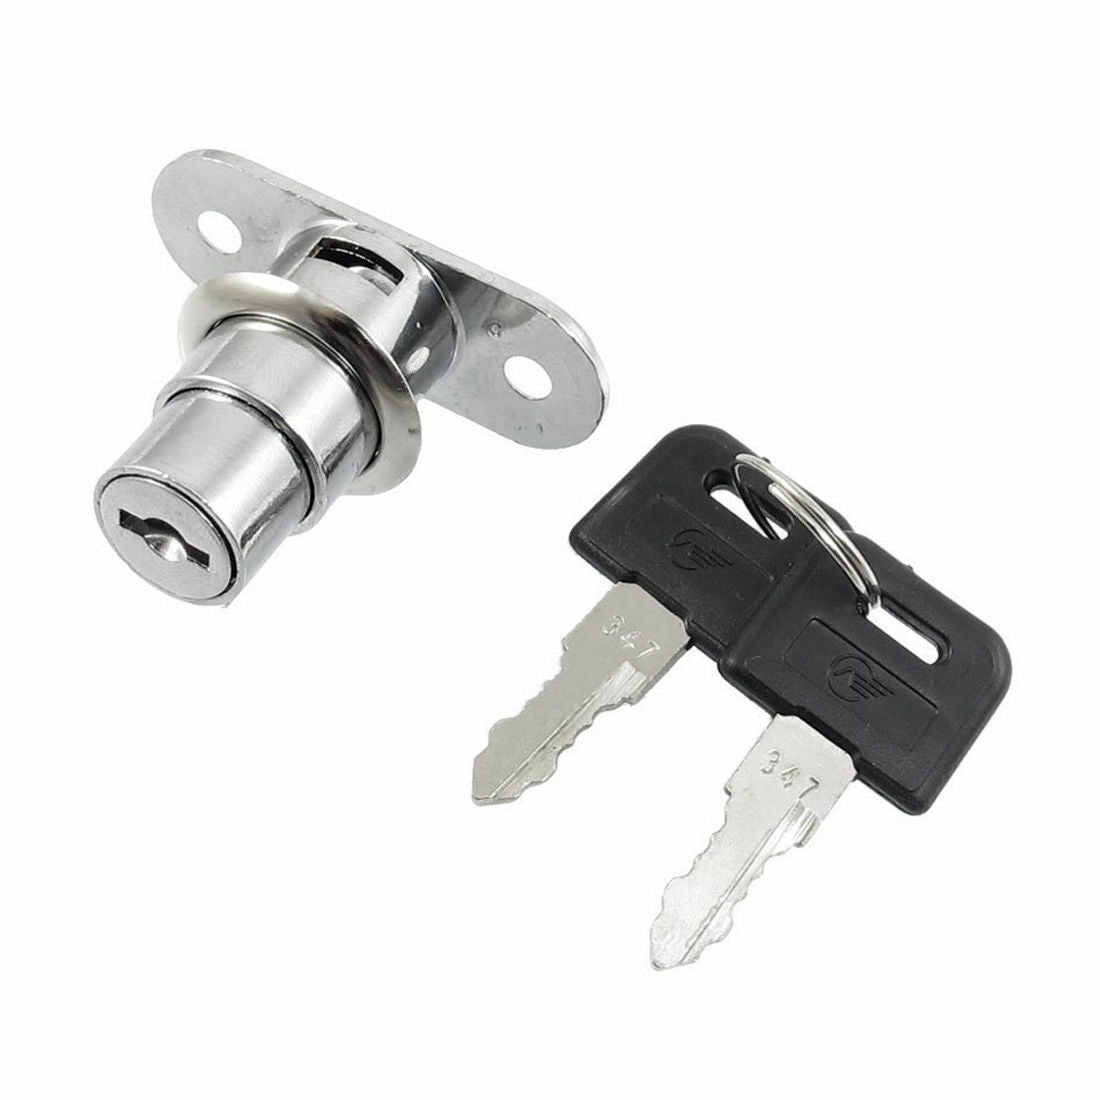 Home Office Door Showcase Cylinder Plunger Lock with 2 Pcs Keys